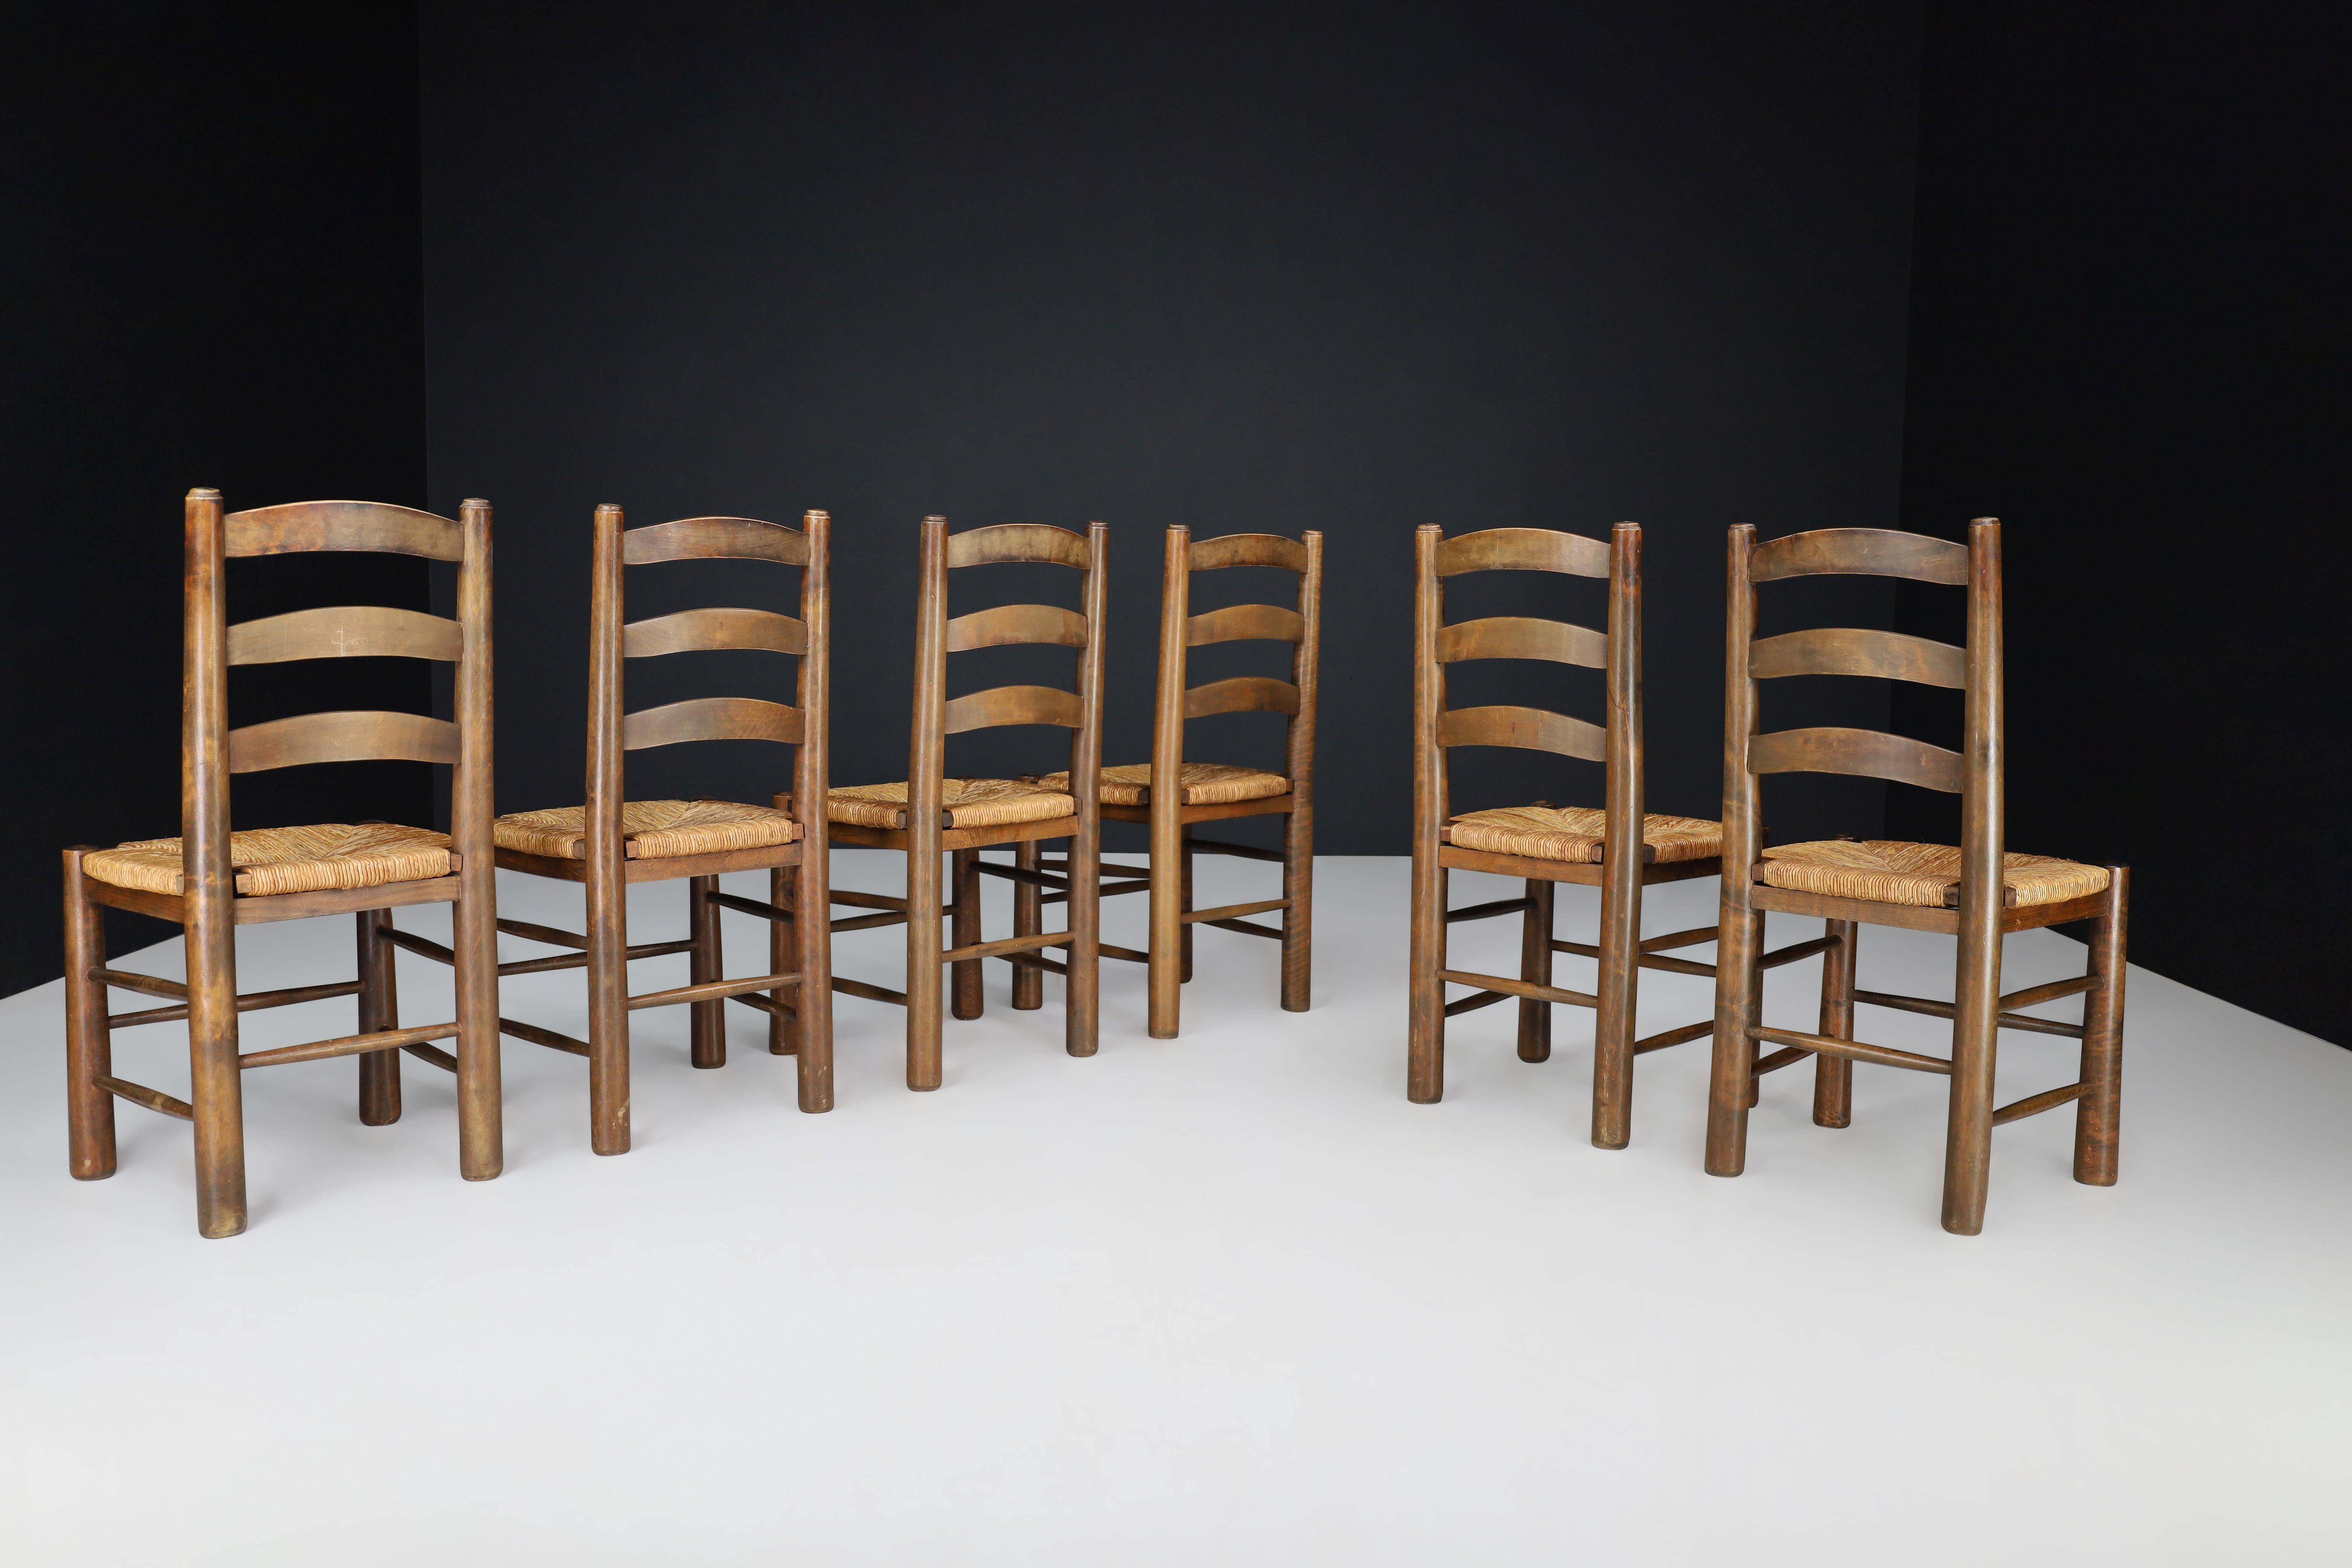 Brutalist Georges Robert Chalet Chairs in Oak and Rush, France, 1950s For Sale